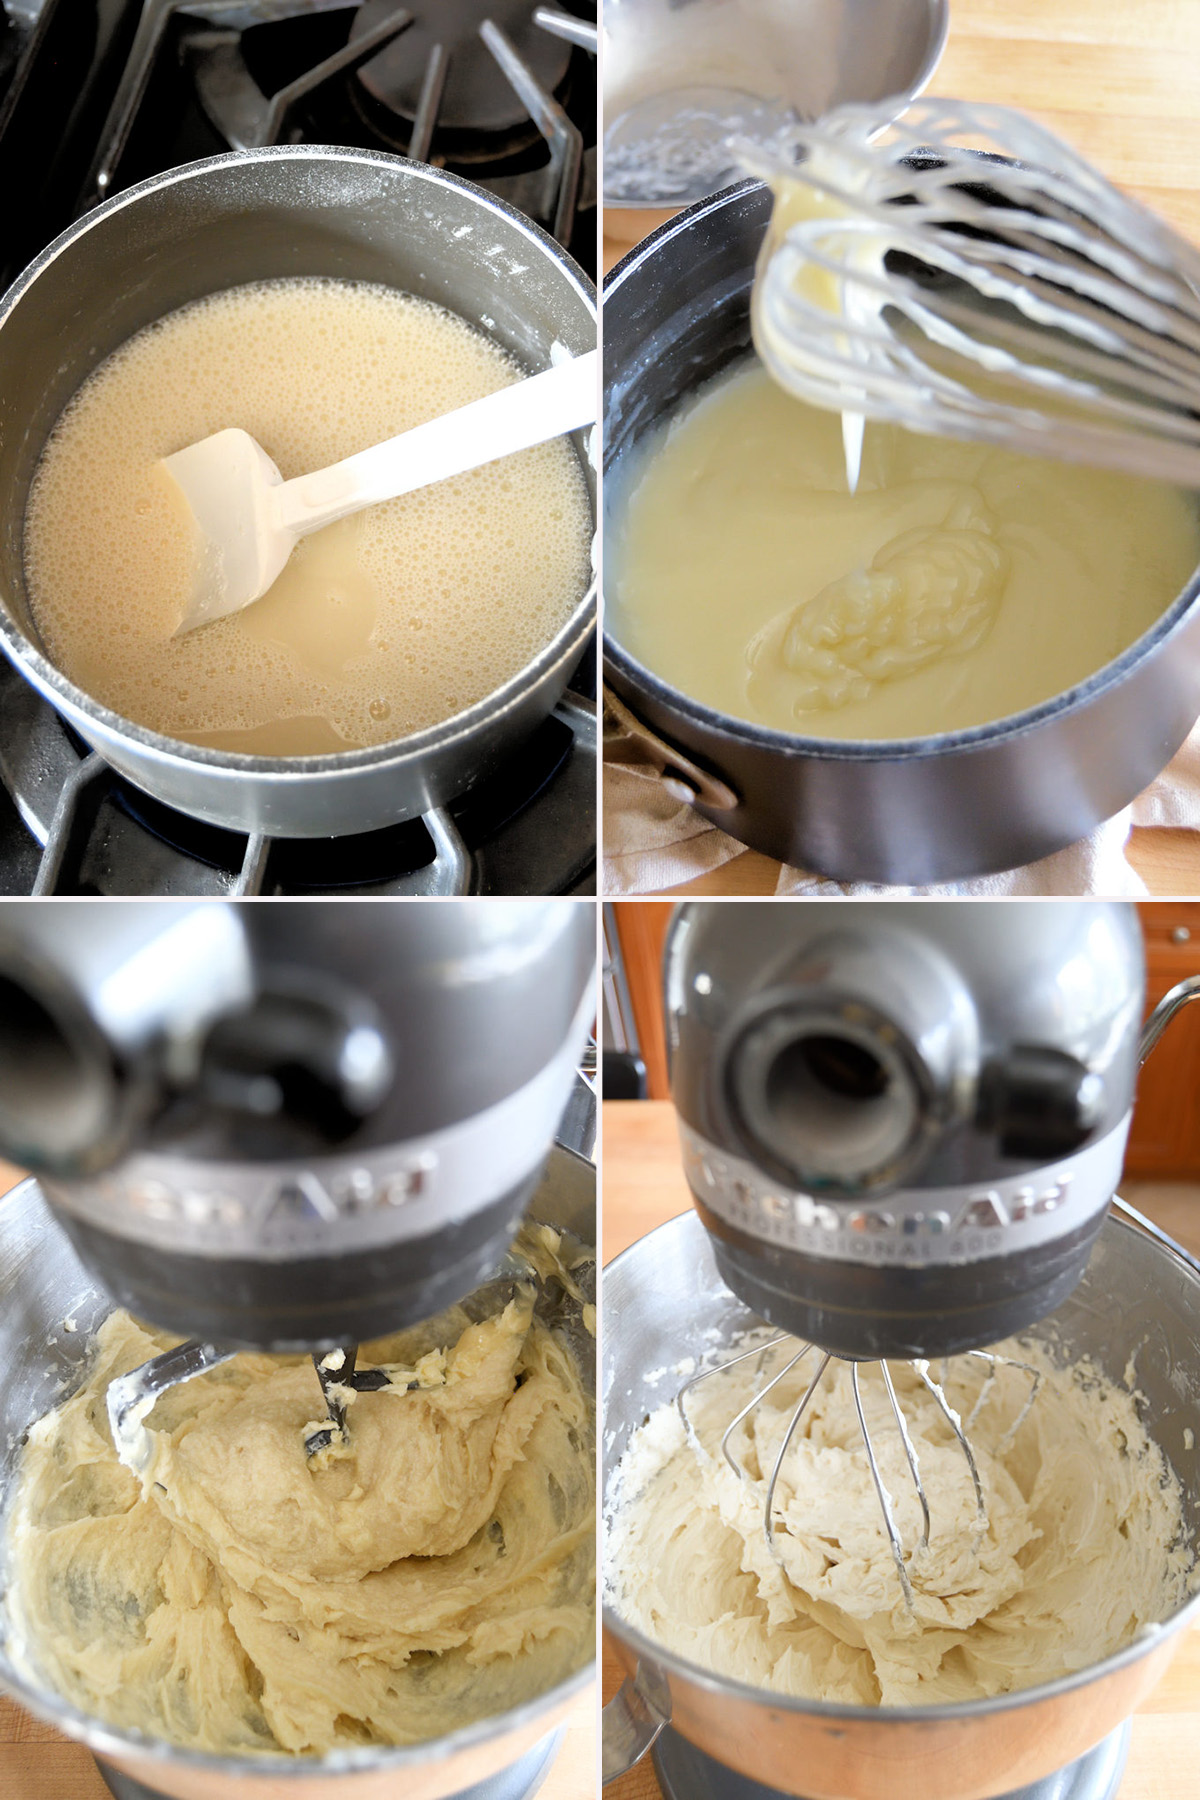 A mixing bowl filled with butter and frosting.